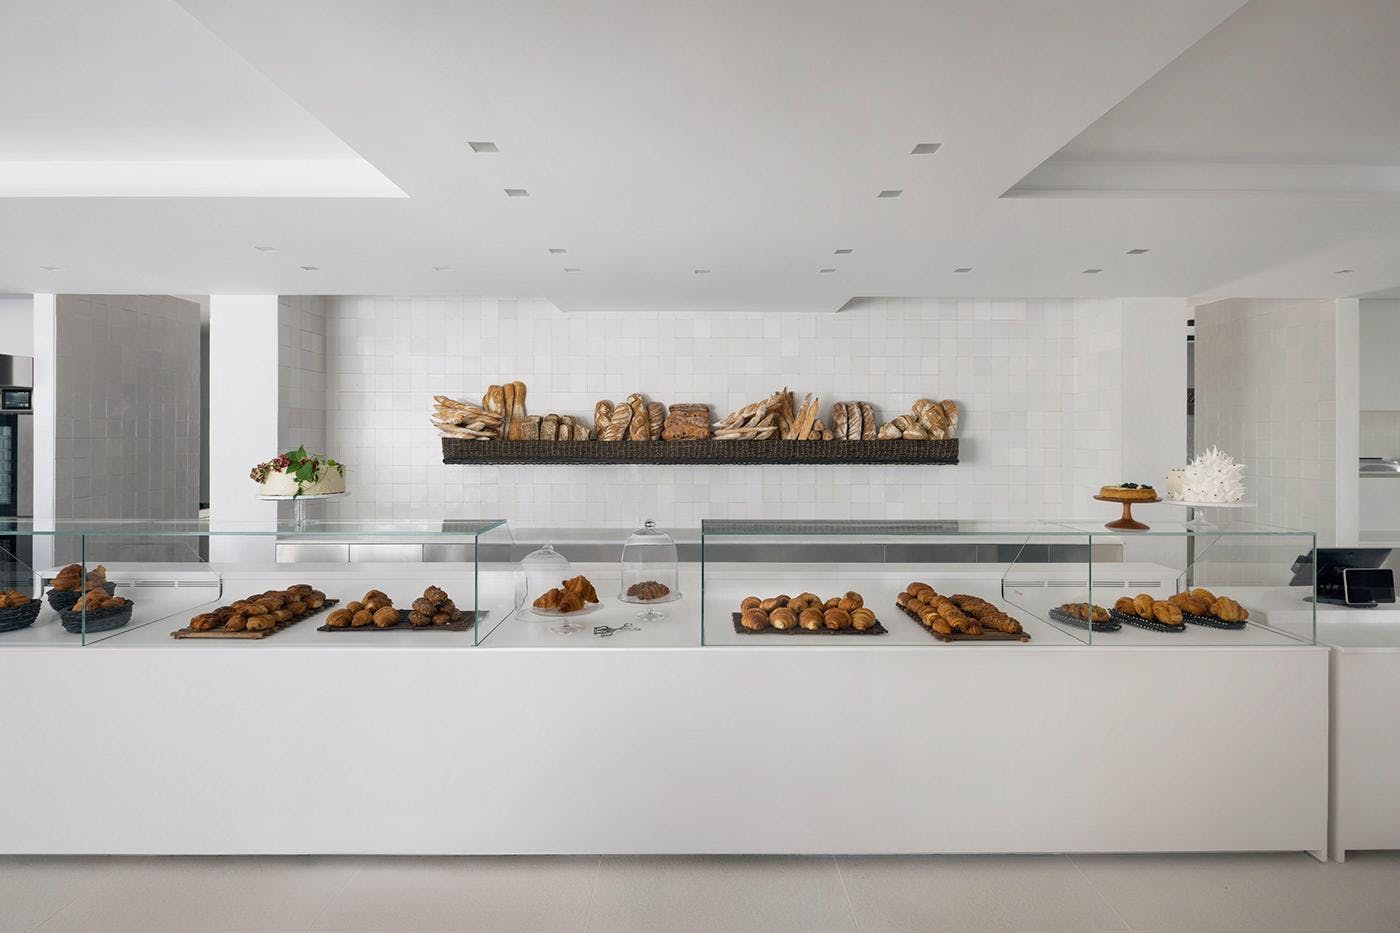 Freshly baked breads in the Hamptons